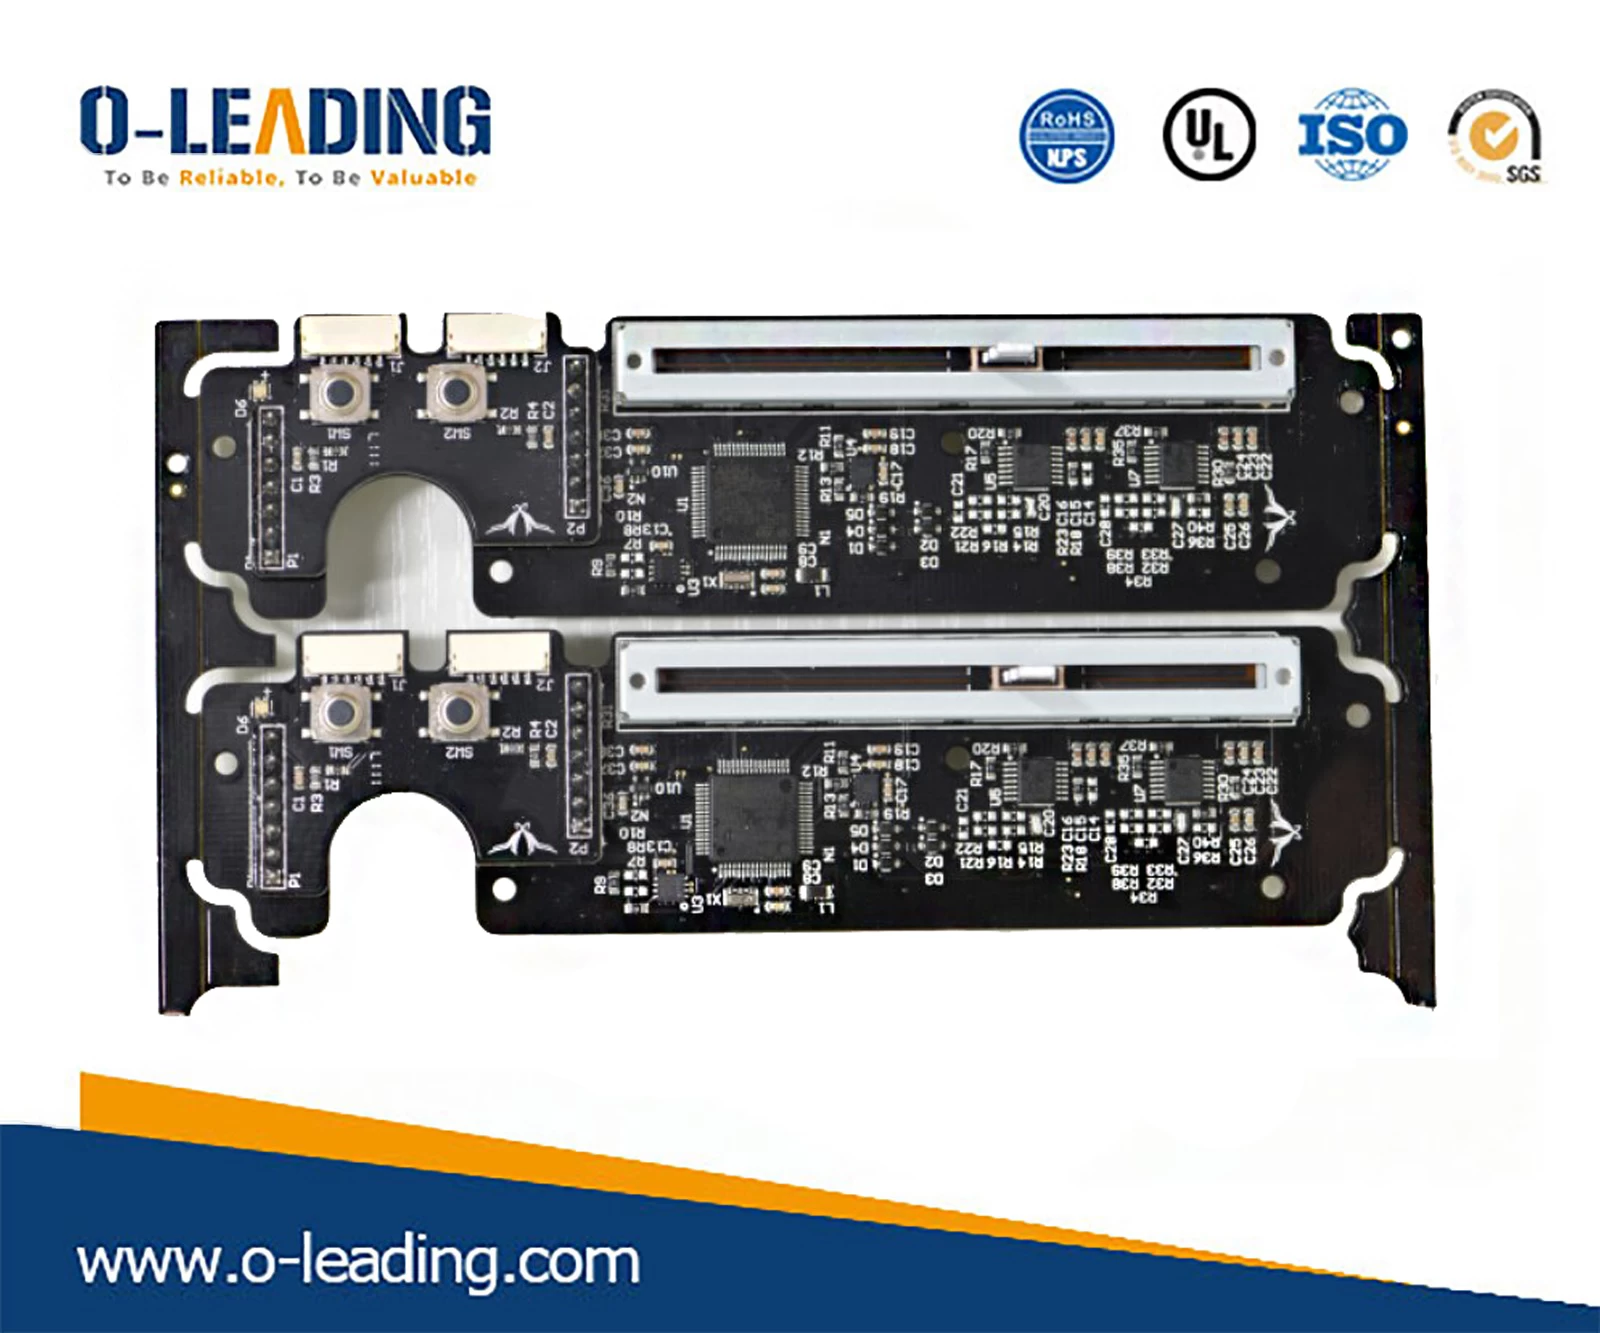 Printed circuit board company, china Mobile phone pcb board manufacture, Holgen free pcb manufacturer china